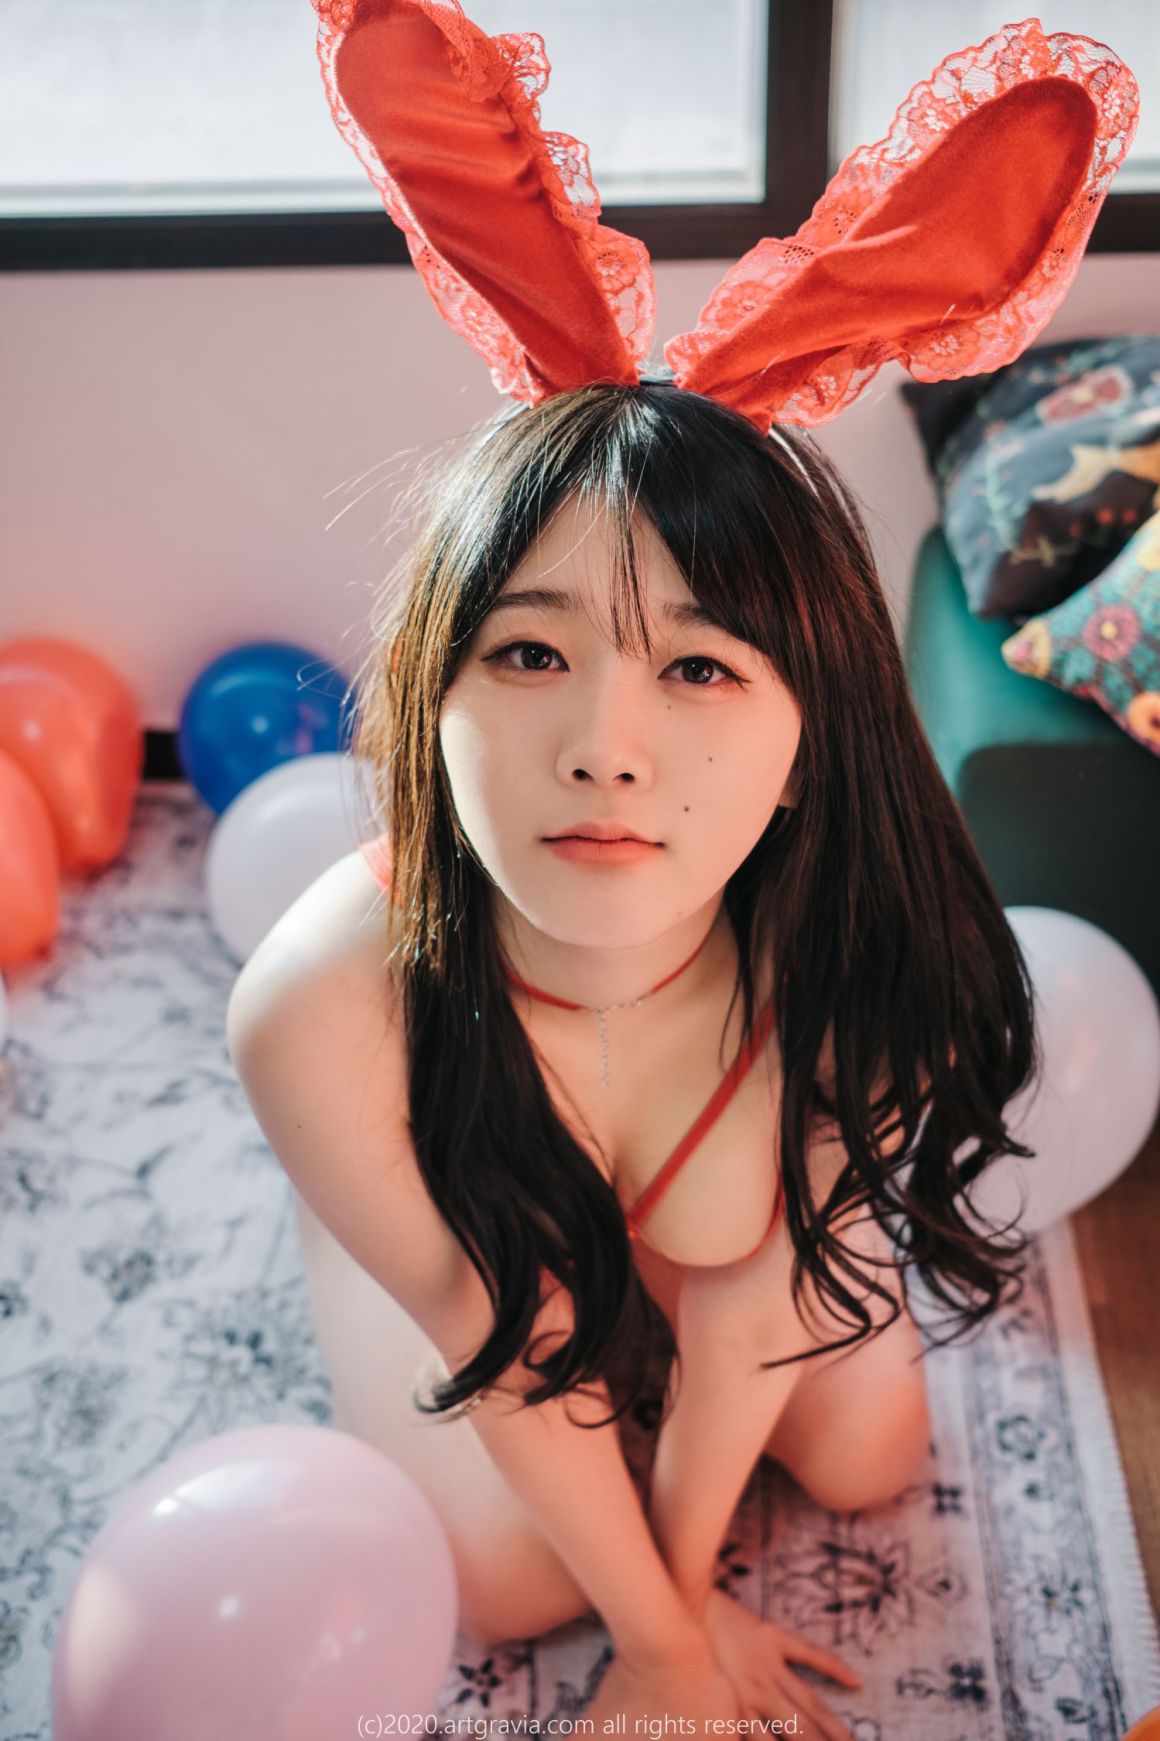 AsianOnlyfans.com 29 305 20211009